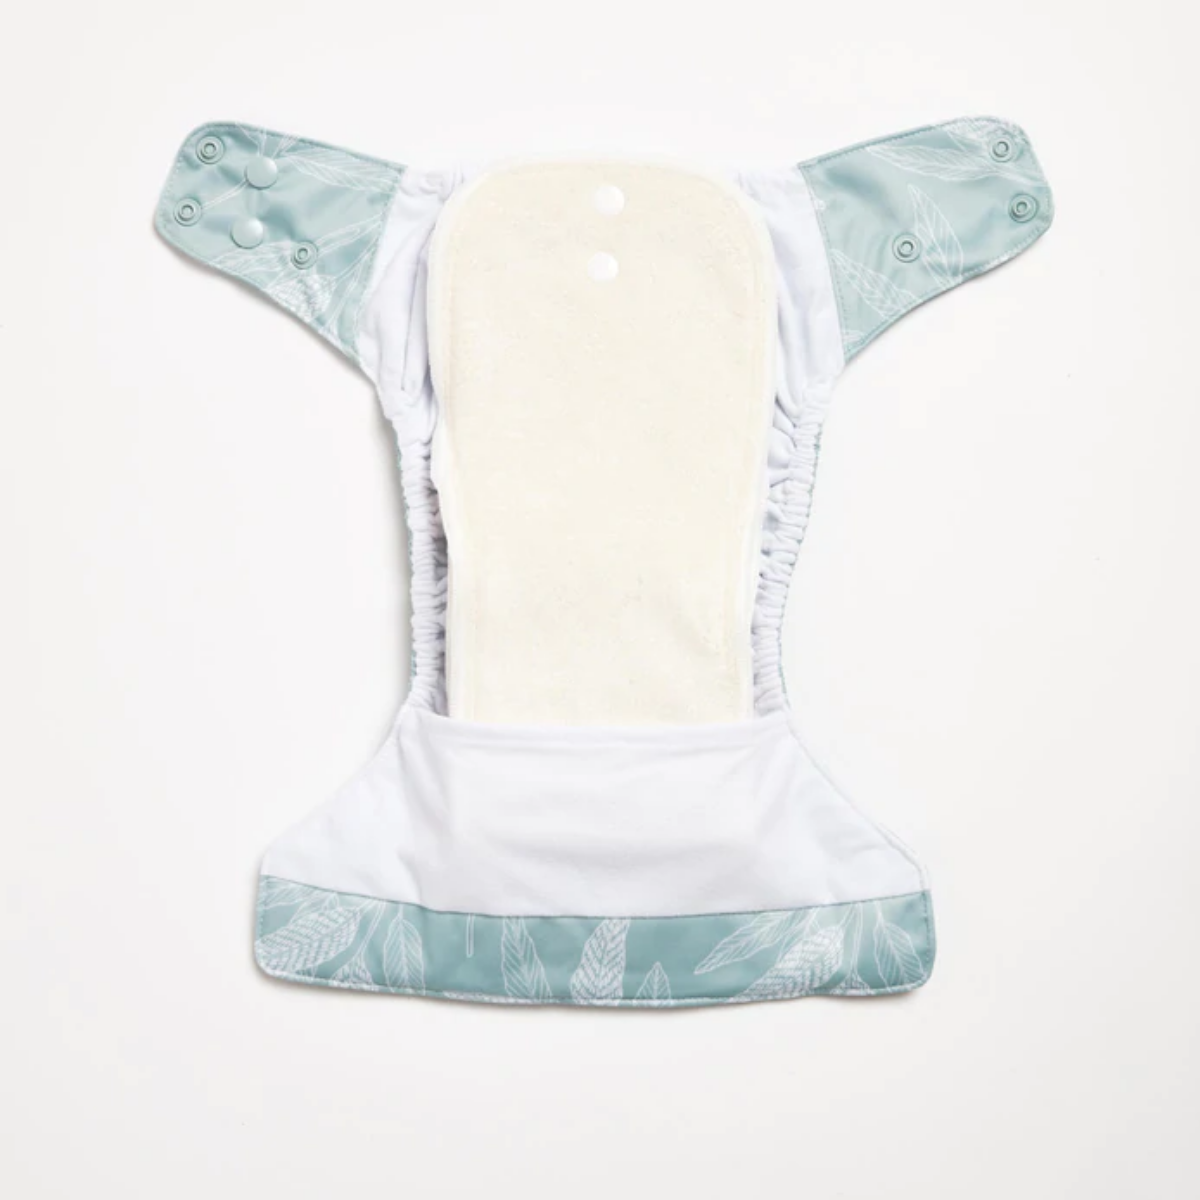 An open Ocean Native 2.0 Modern Cloth Nappy with white native prints on it by EcoNaps.